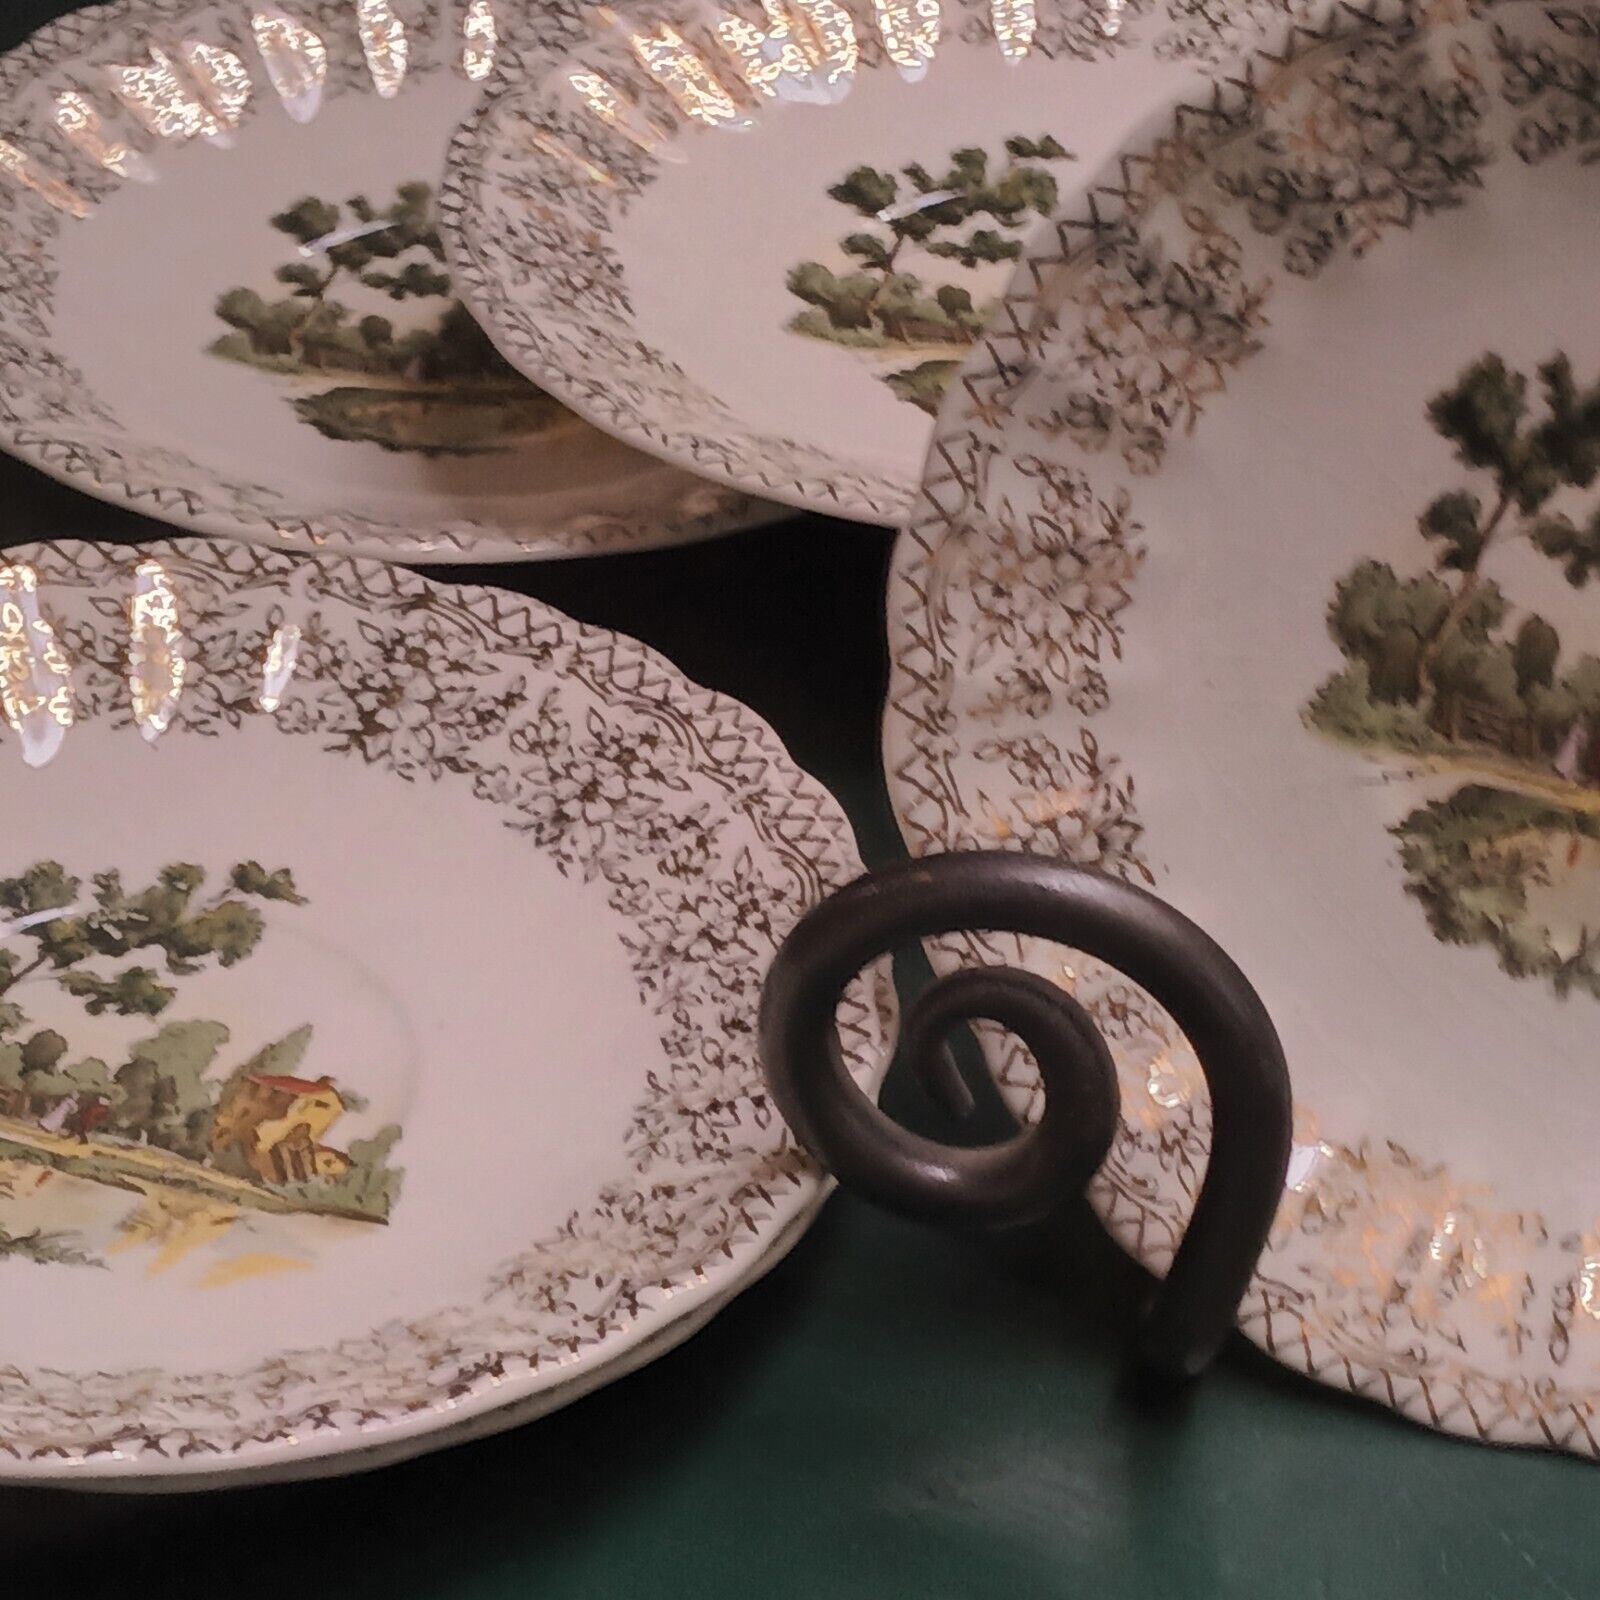 6 Vintage American Limoges 6 Inch Saucers  Chateau France Country Scene Made USA